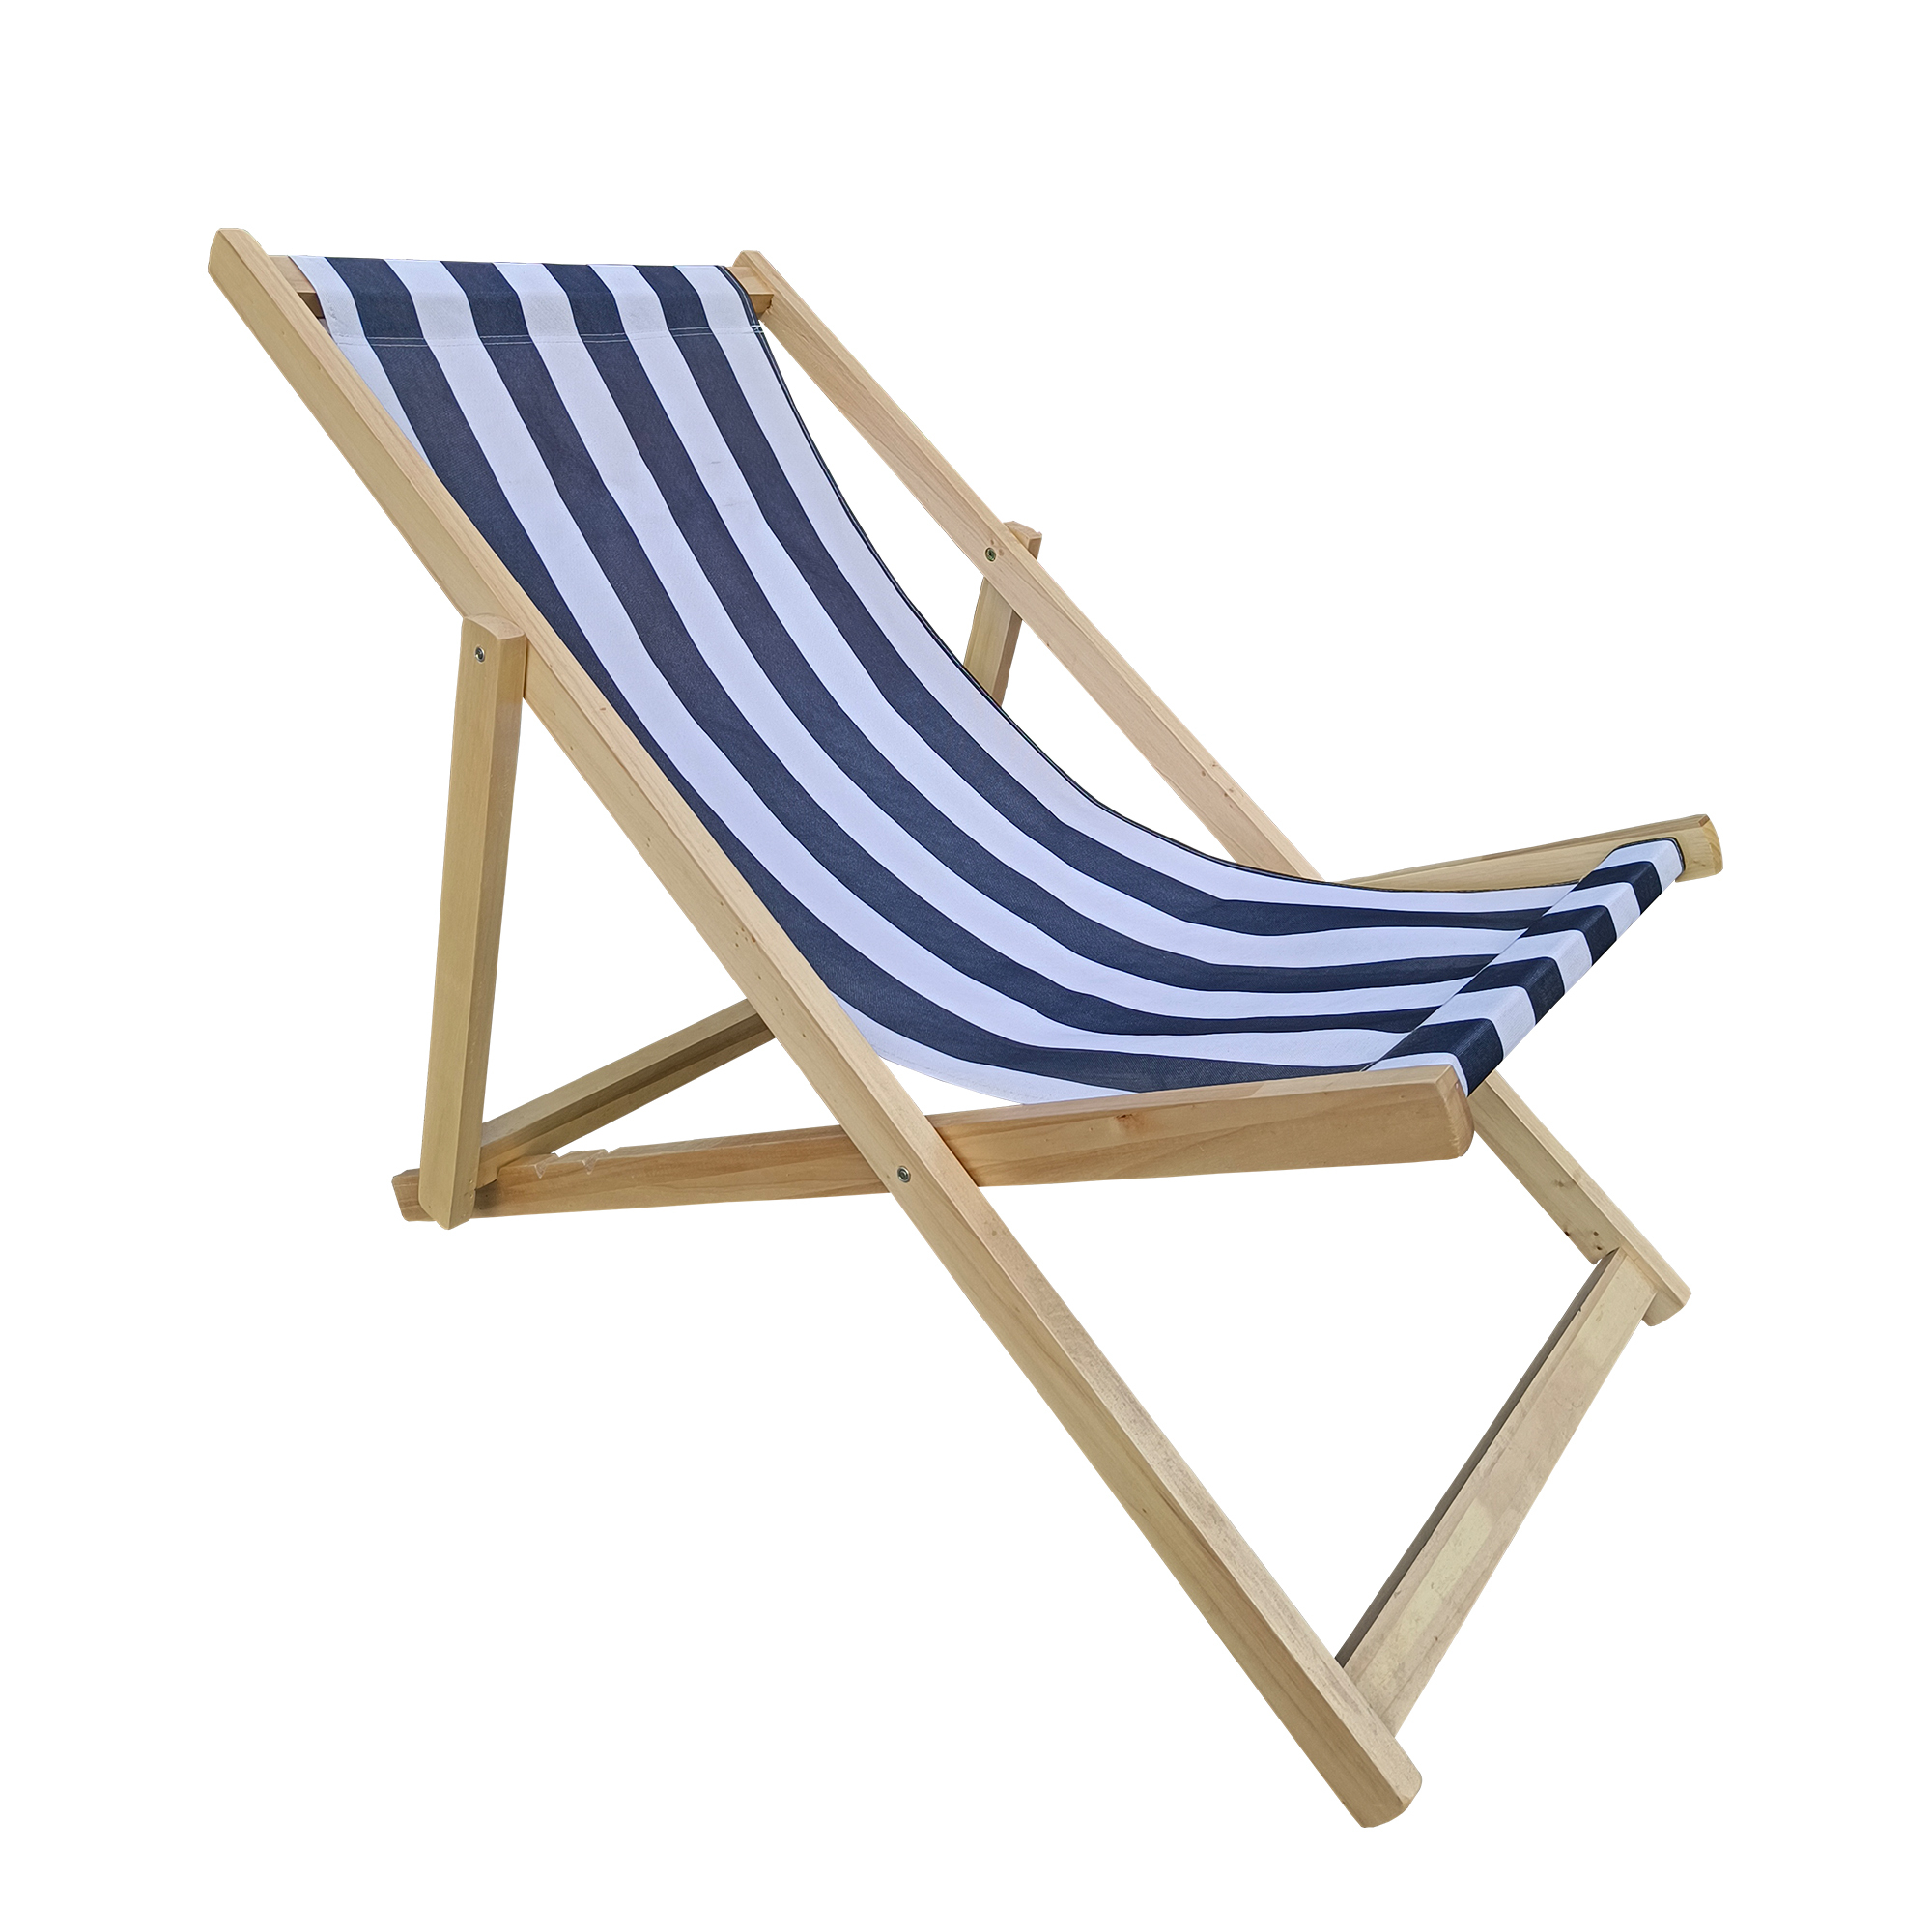 MONSTRUNO Stripe Chaise Lounge Chair - Garden Outdoor Folding Lounge Chairs Wood, Stacking Sling Chaise Lounge, Dark Blue - image 2 of 7